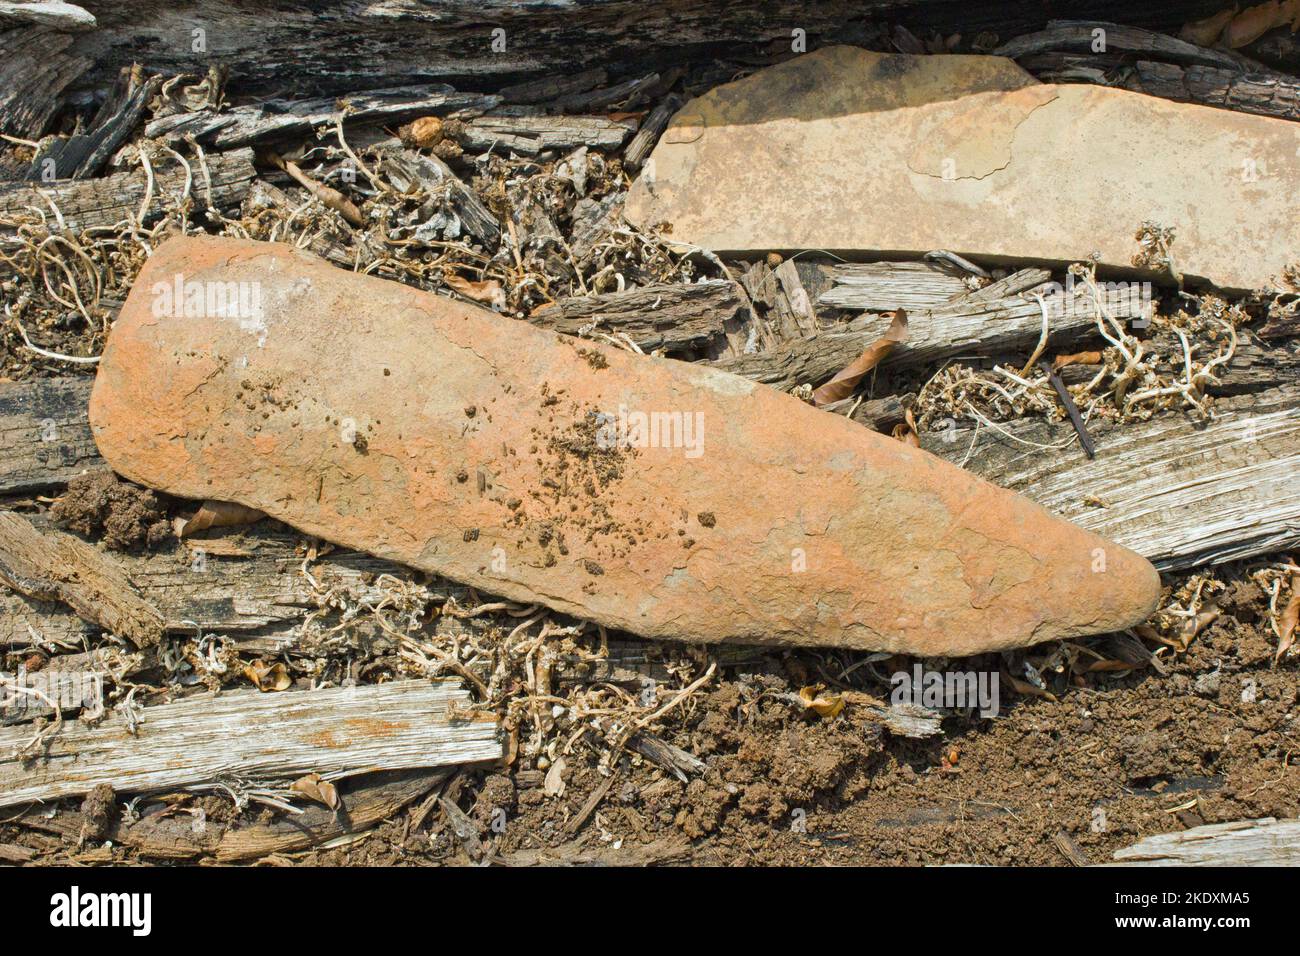 Antique and historic stone tools dug up in South Africa, used for digging for food Stock Photo